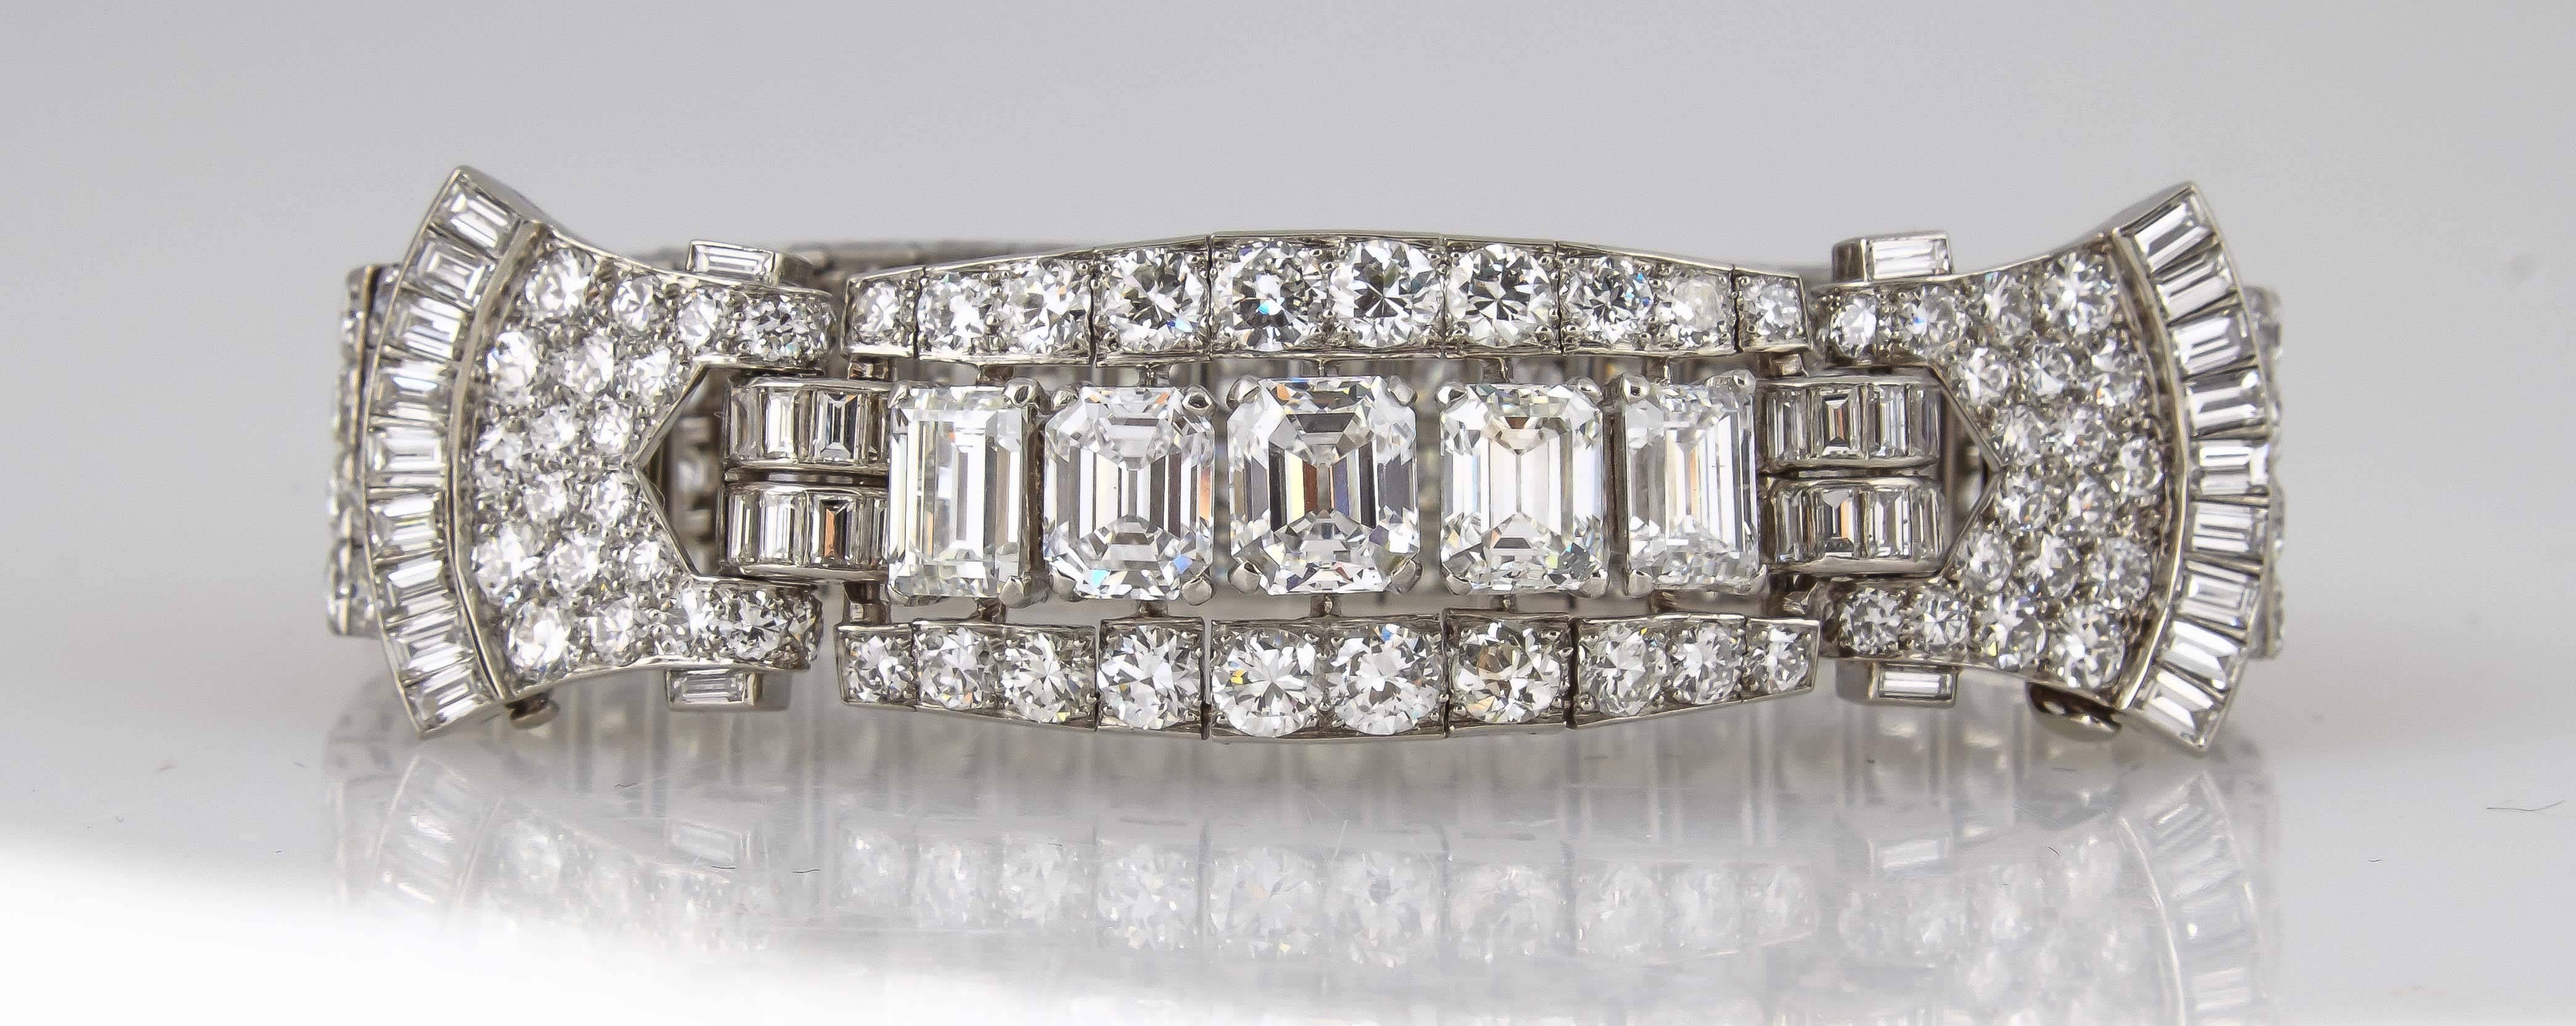 Fantastic Art Deco bracelet, centering  5 emerald-cut diamonds  weighing a total of  7.72 carats certified by GIA, surrounded by  a mix of round and emerald cut diamonds weighing a total of approximately 23.00 carats. 